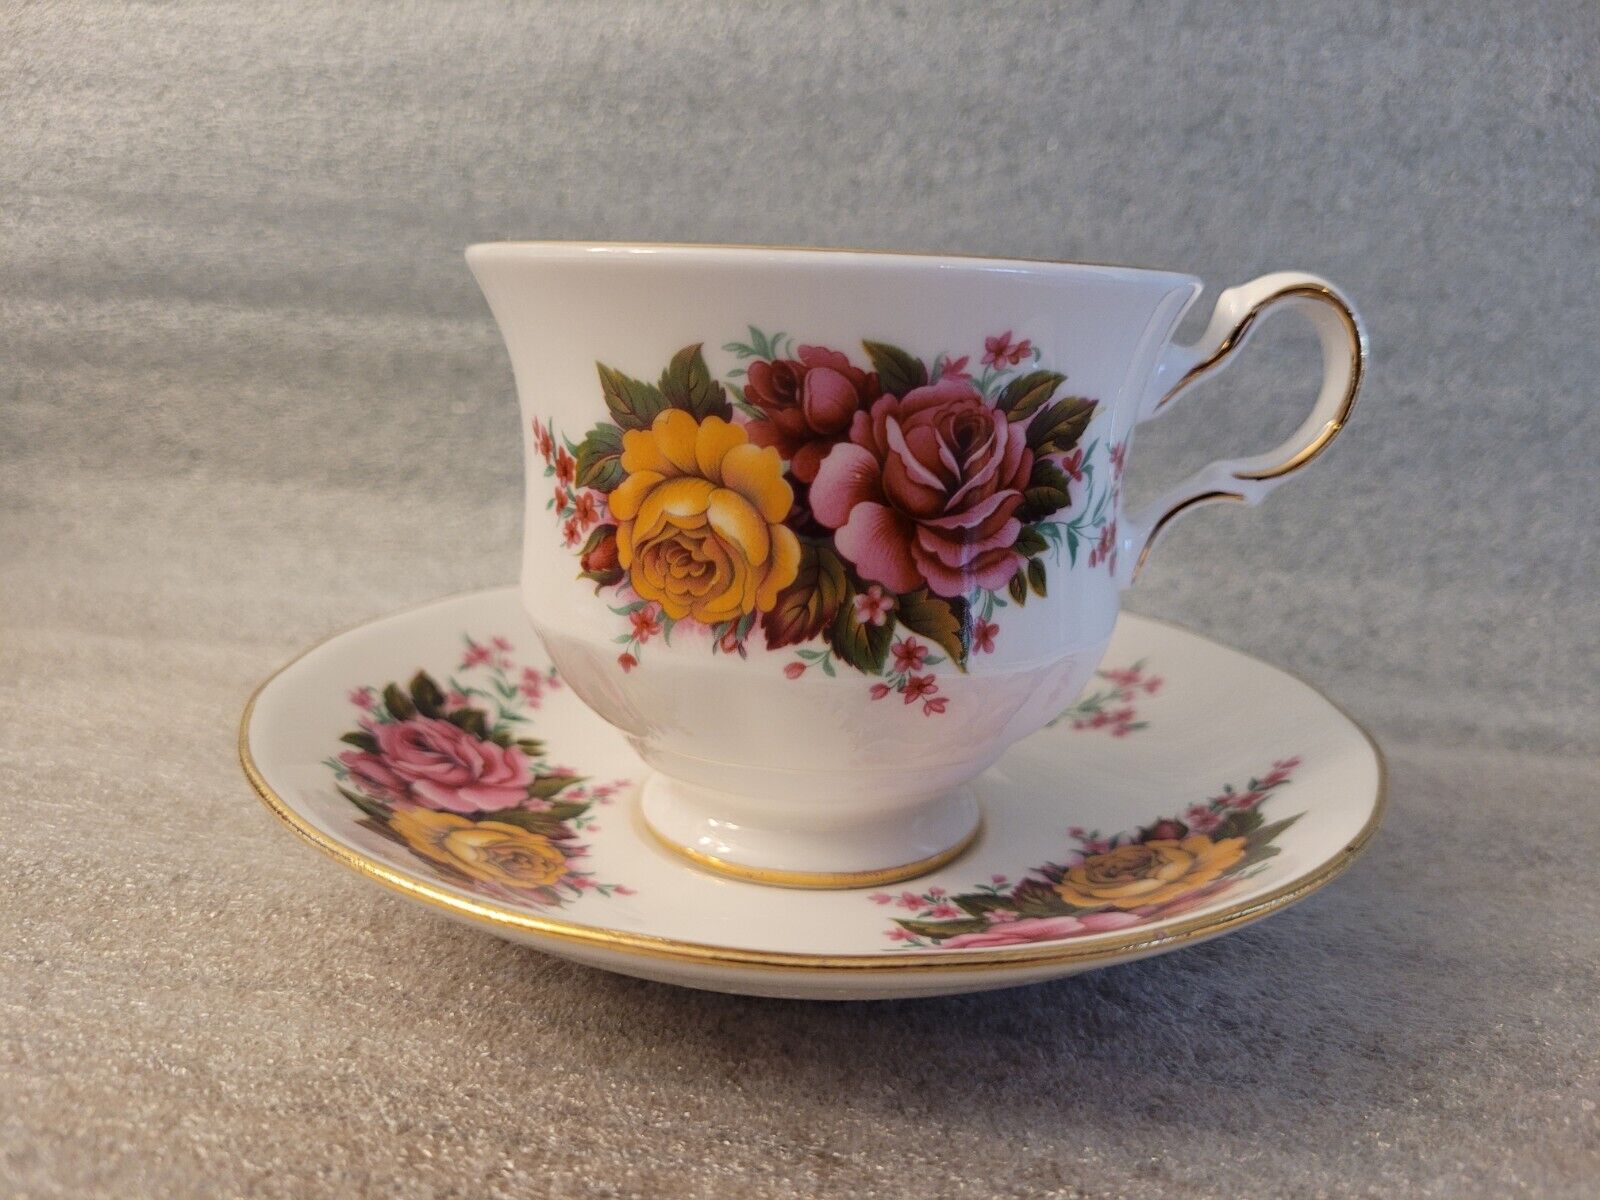 VTG Queen Anne England Red & Yellow Rose Gold Rimmed Footed Tea Cup And SAUCER 